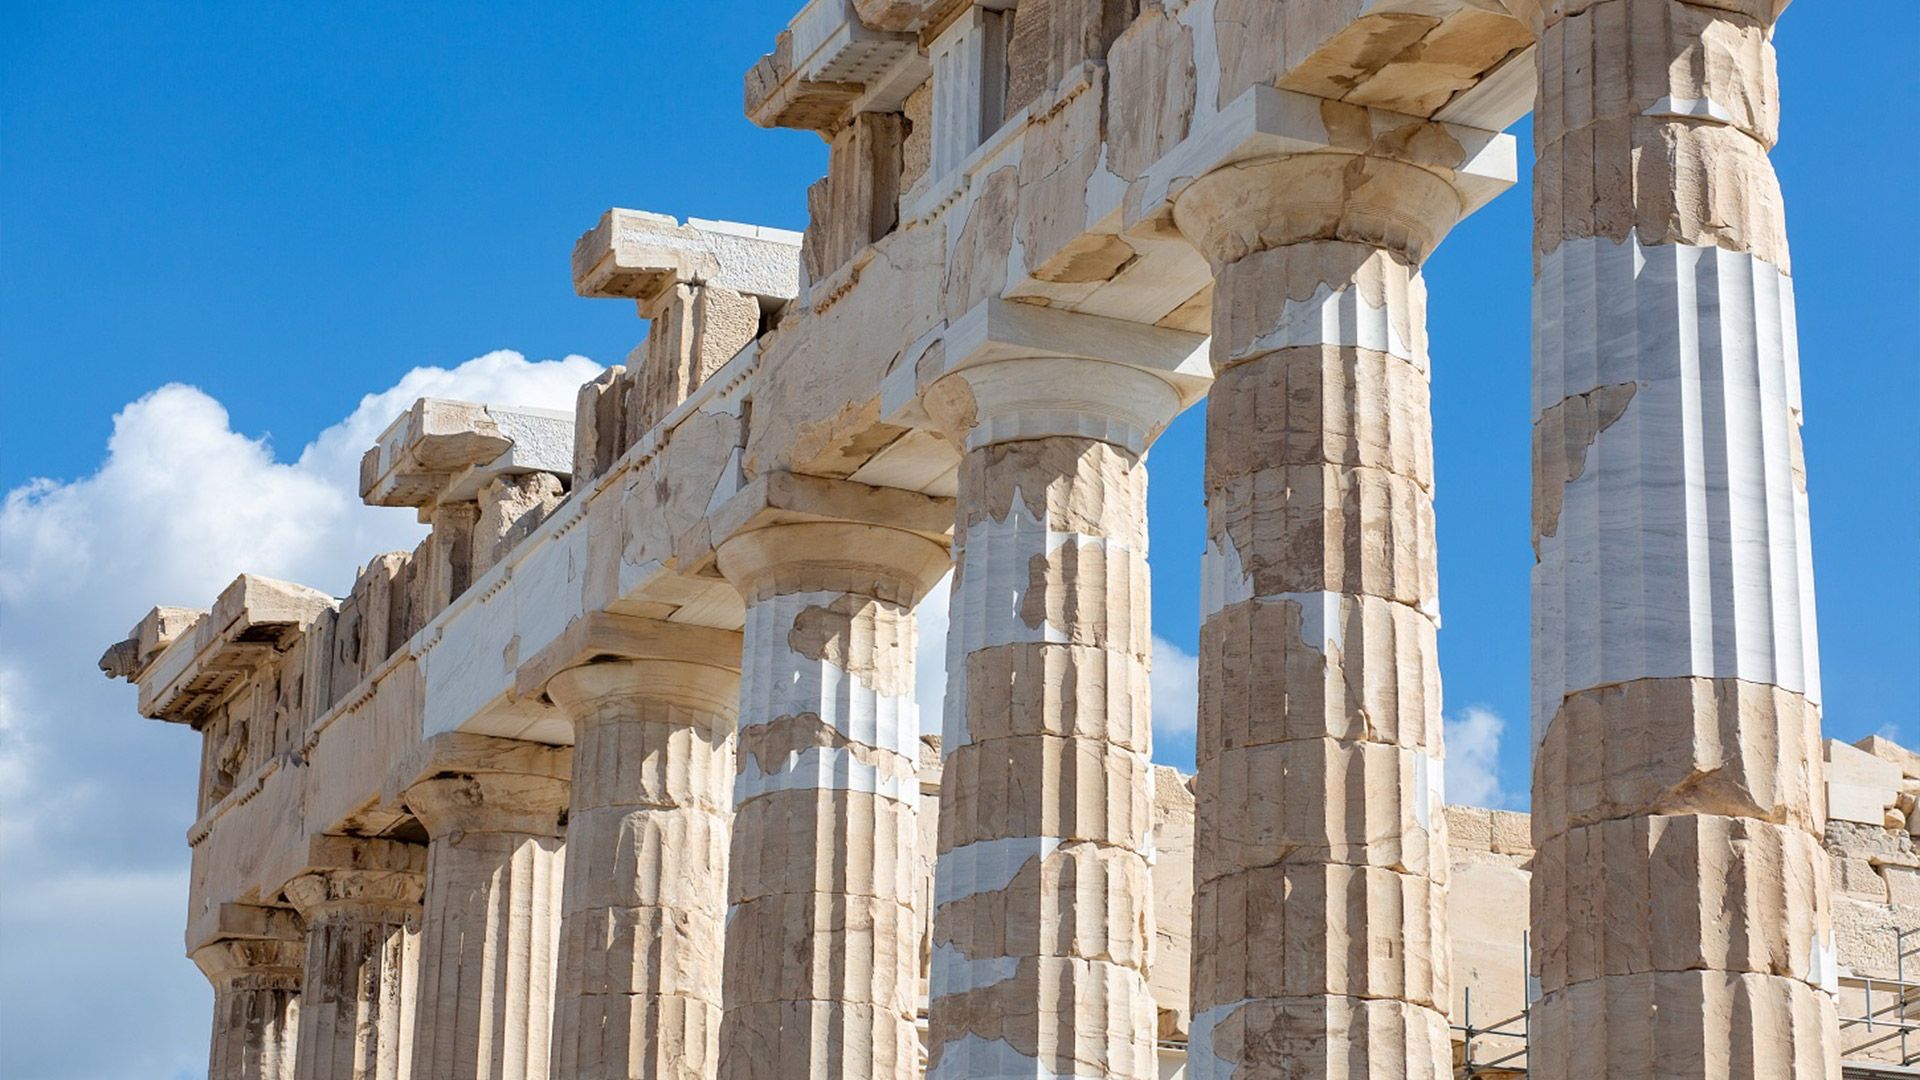 With PayPorter, you can make fast, easy and safe money transfers to Greece at the most affordable prices!